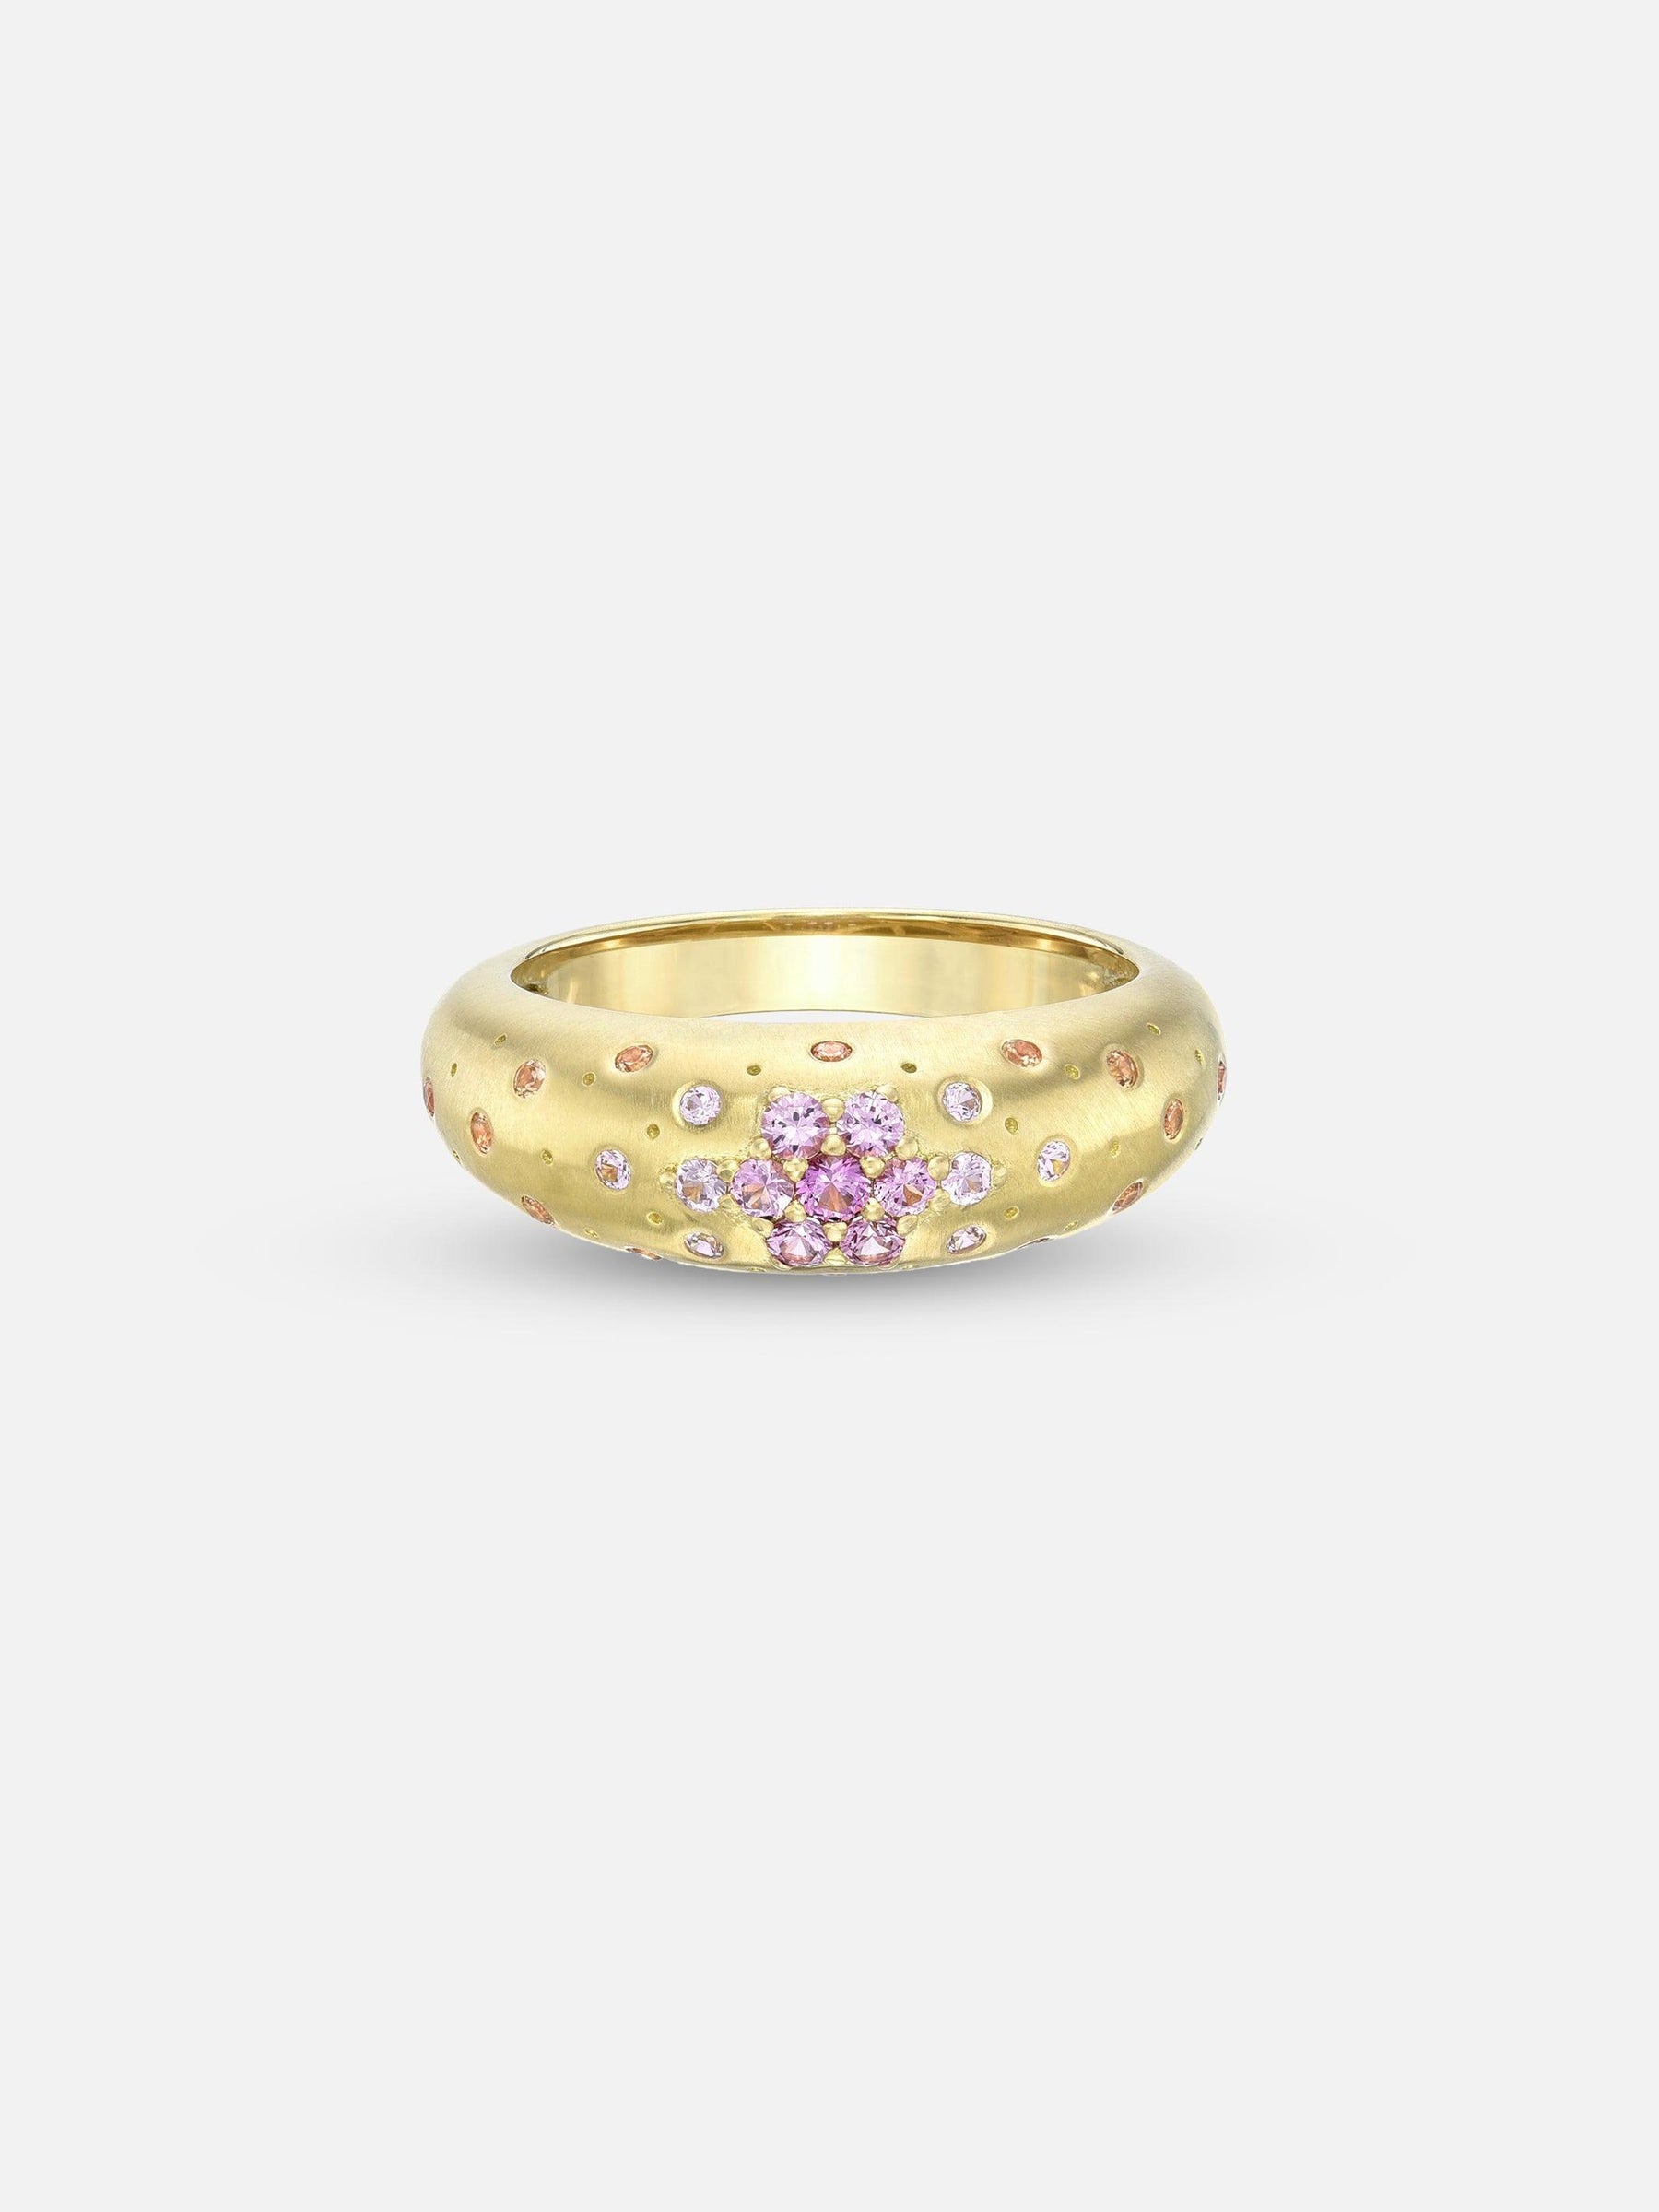 Sunset Stacking Ring - Meredith Young - At Present